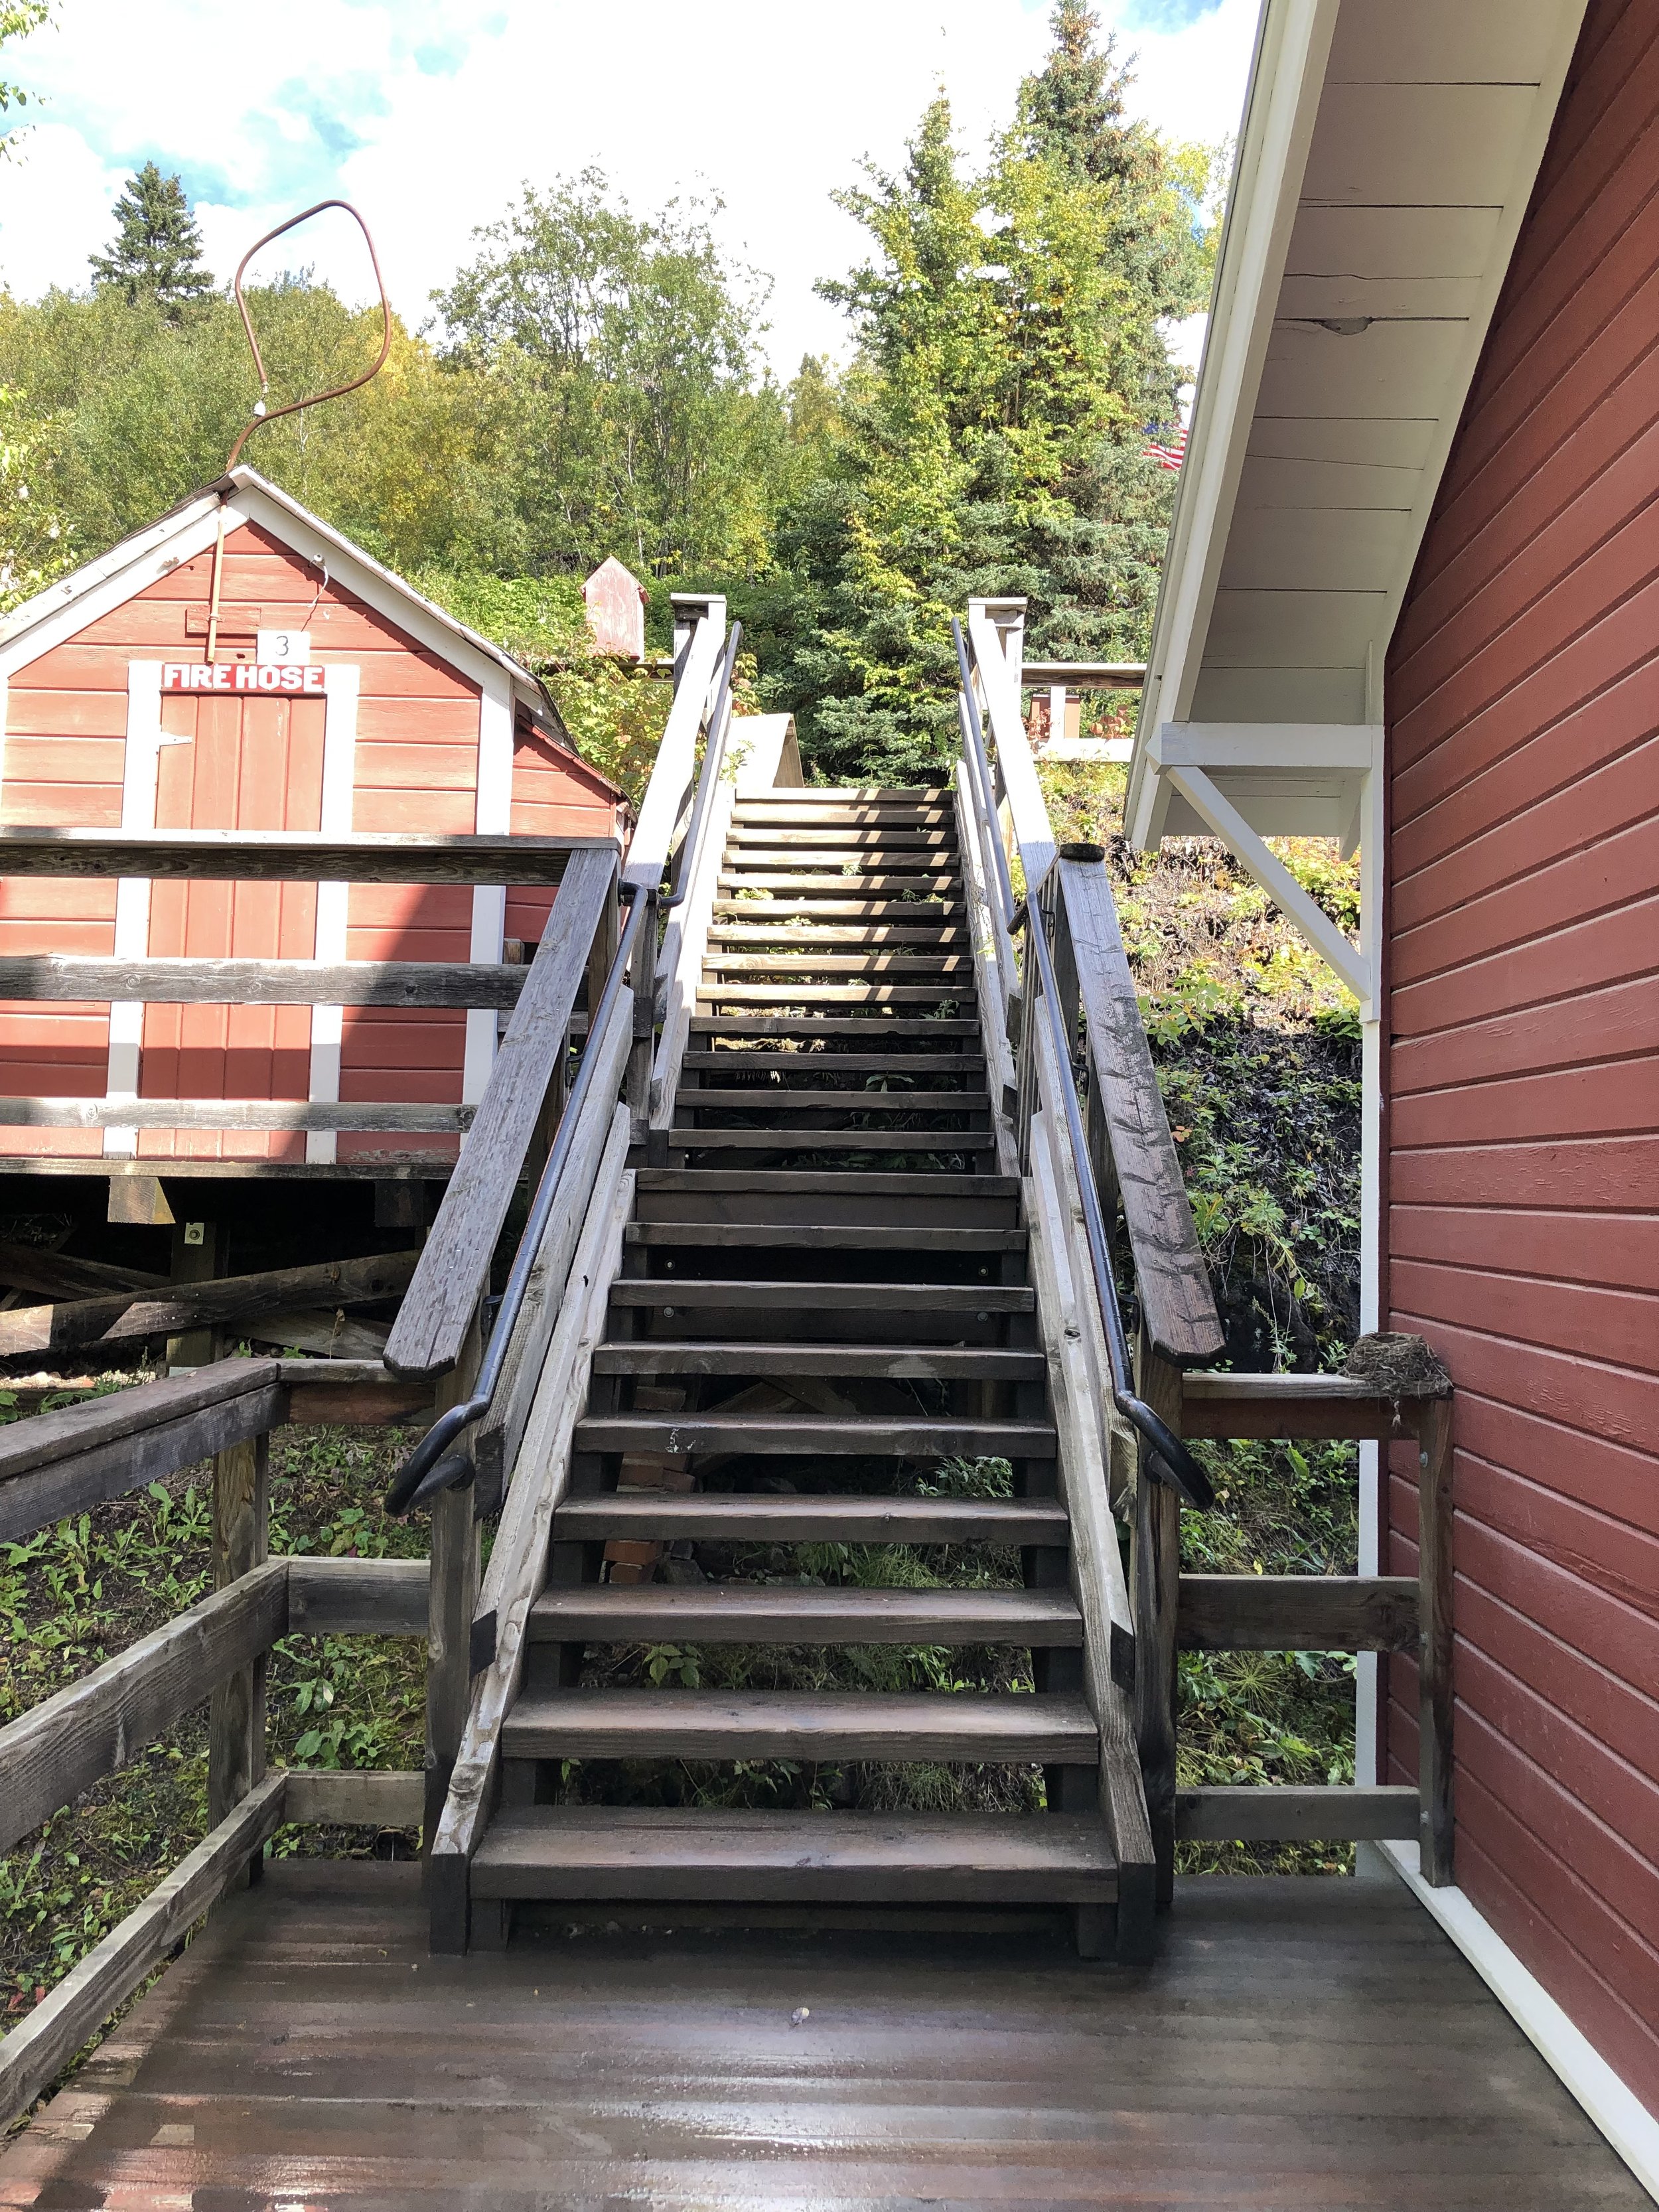 exterior stairs up to road.jpeg